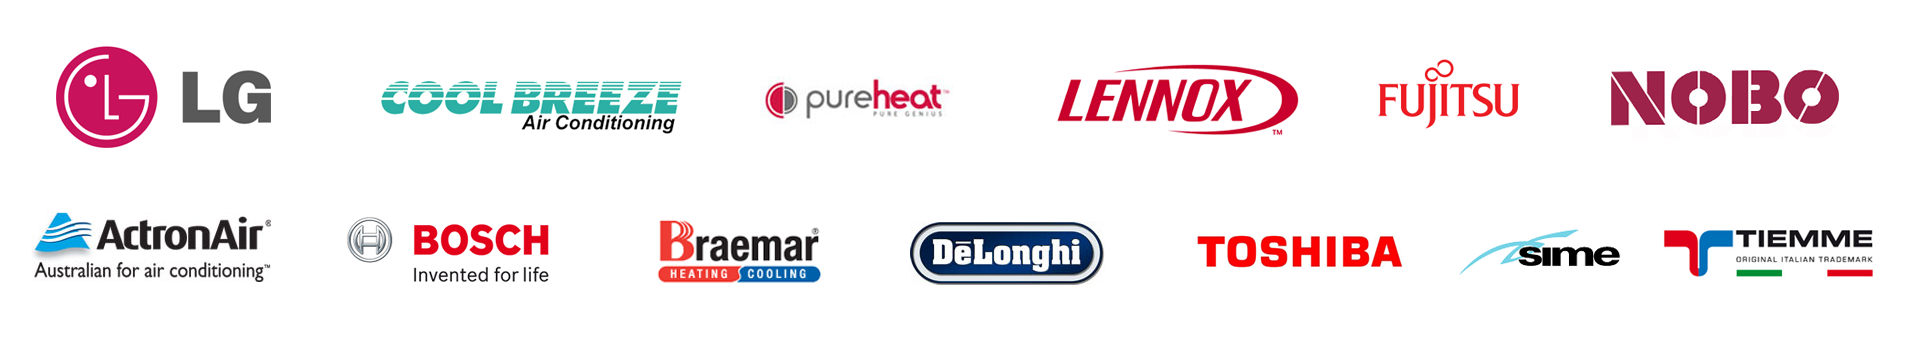 call mercury's range of air conditioning and heating brands